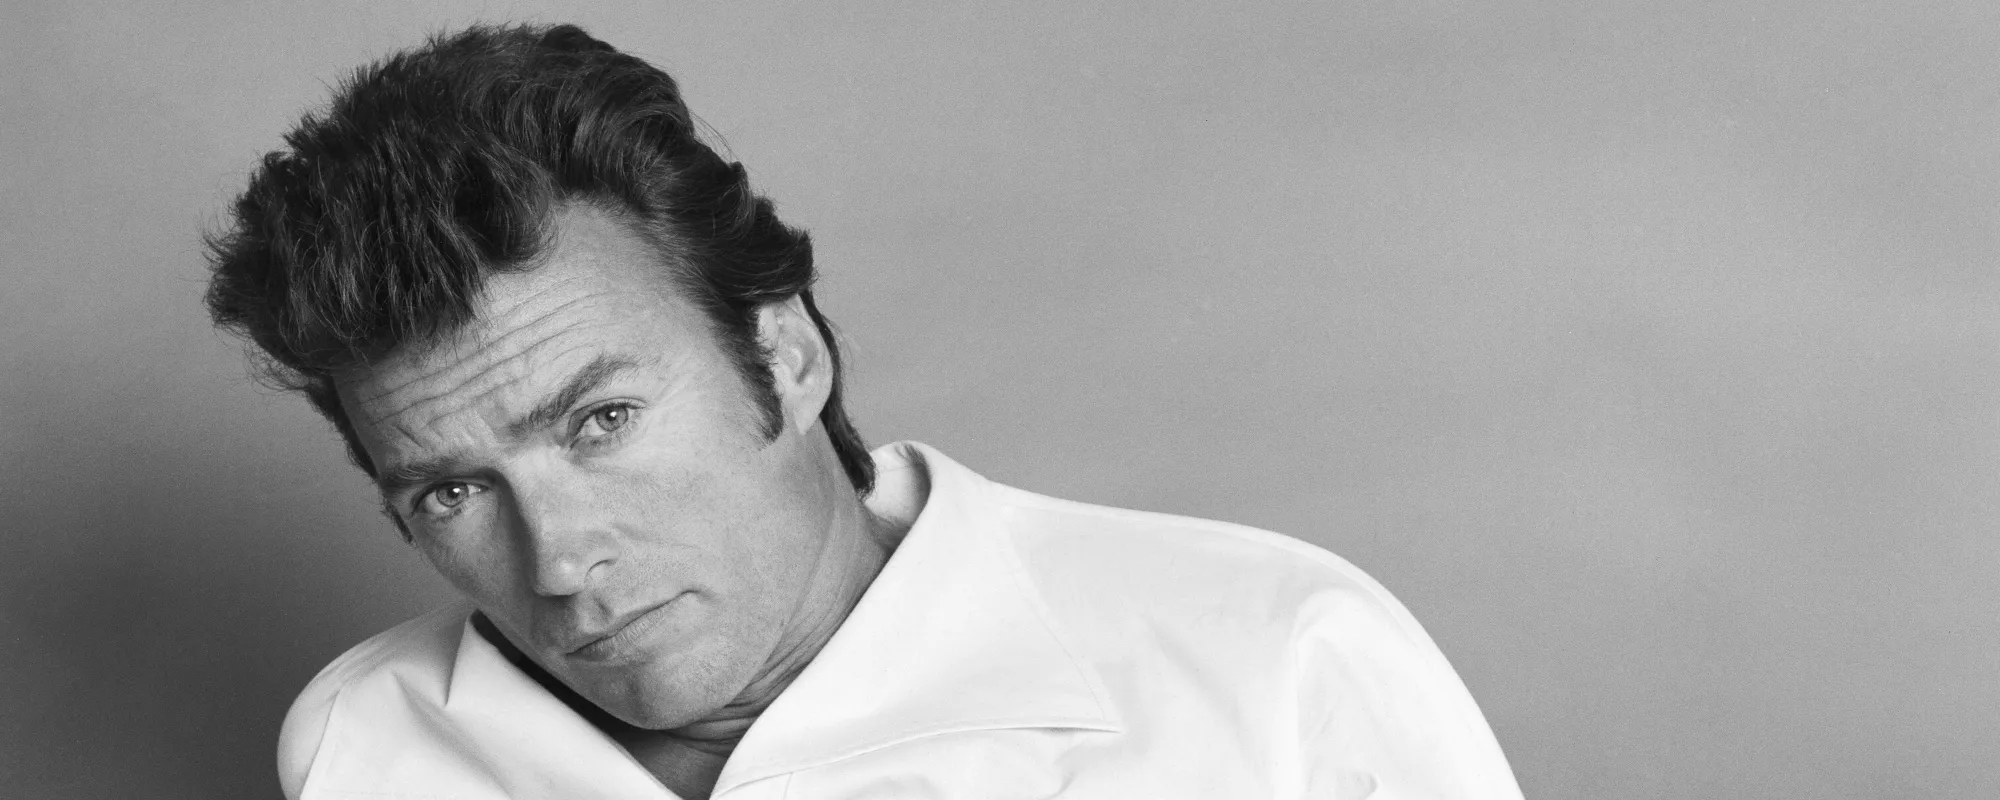 4 Songs Inspired by Clint Eastwood